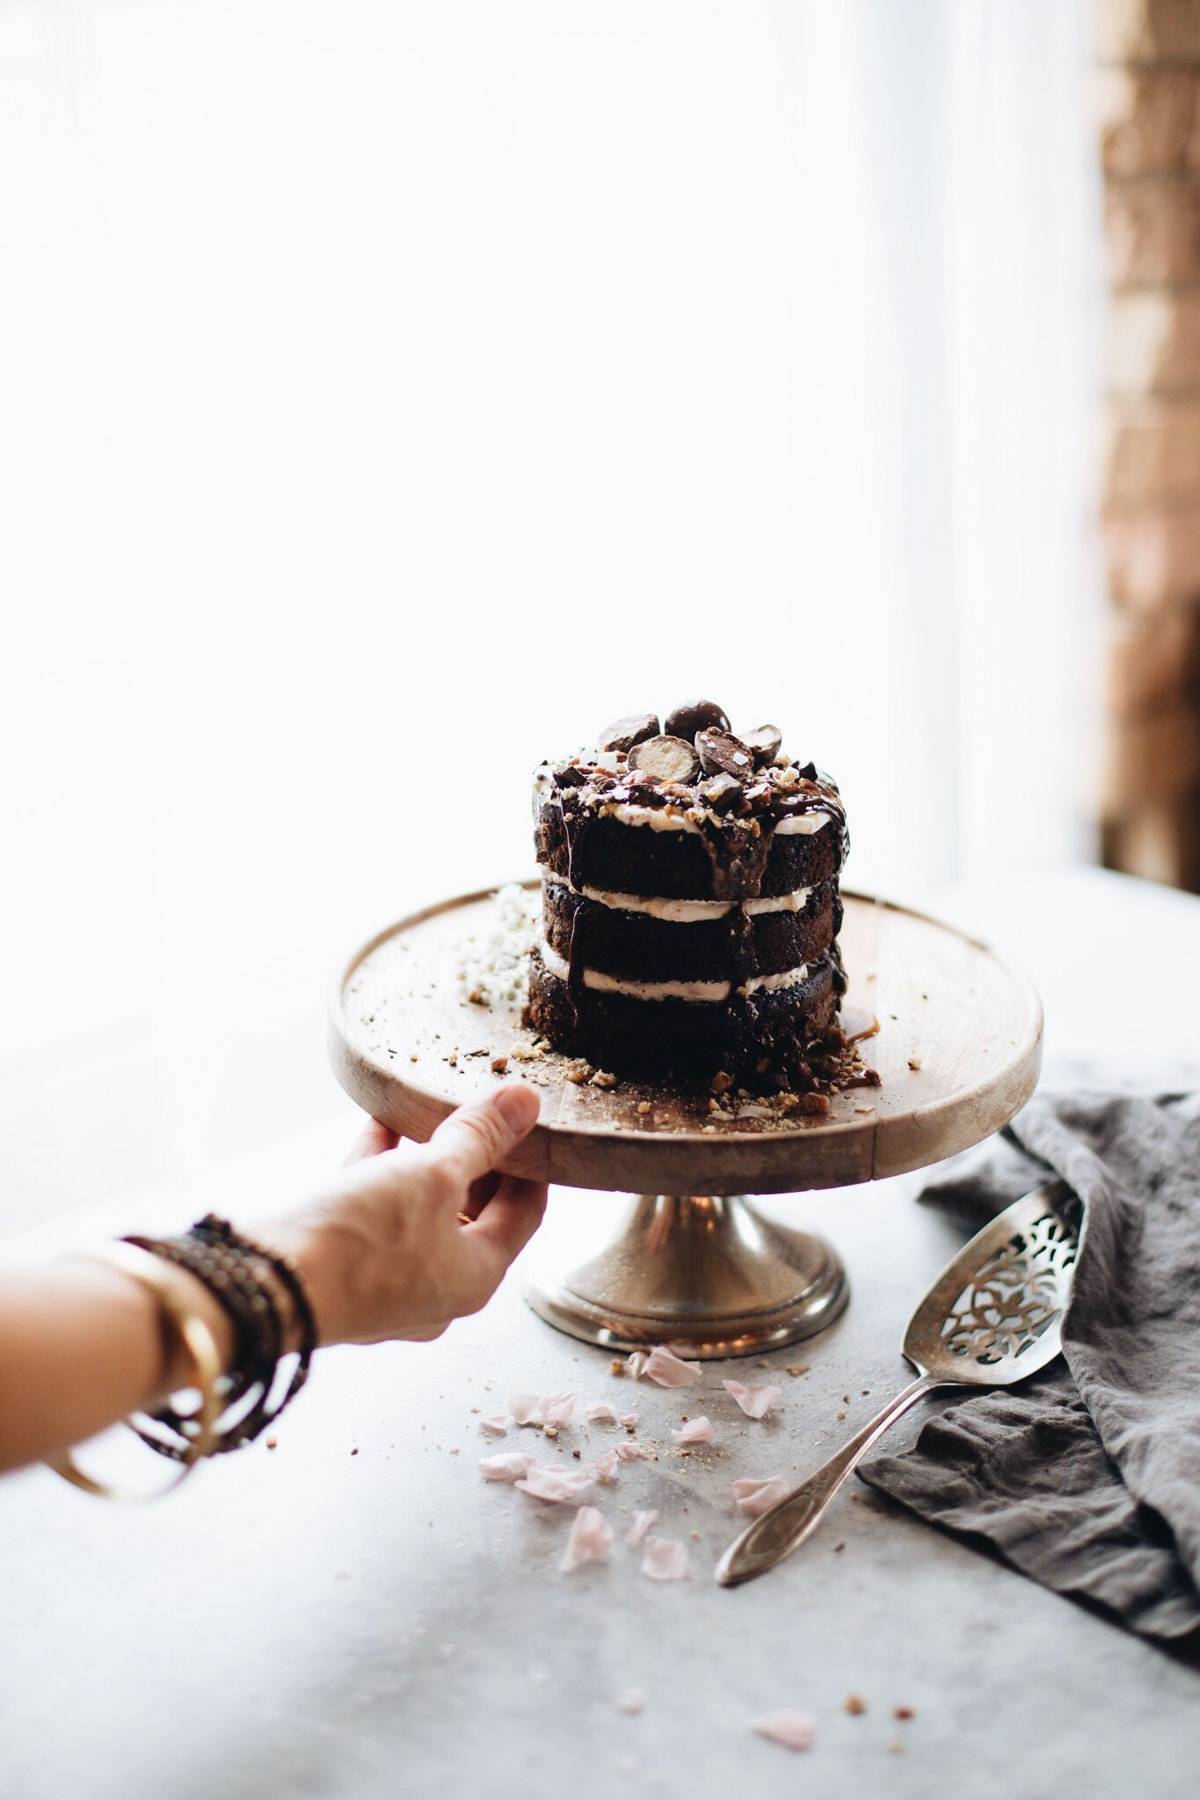 Small chocolate cake on a cake stand.